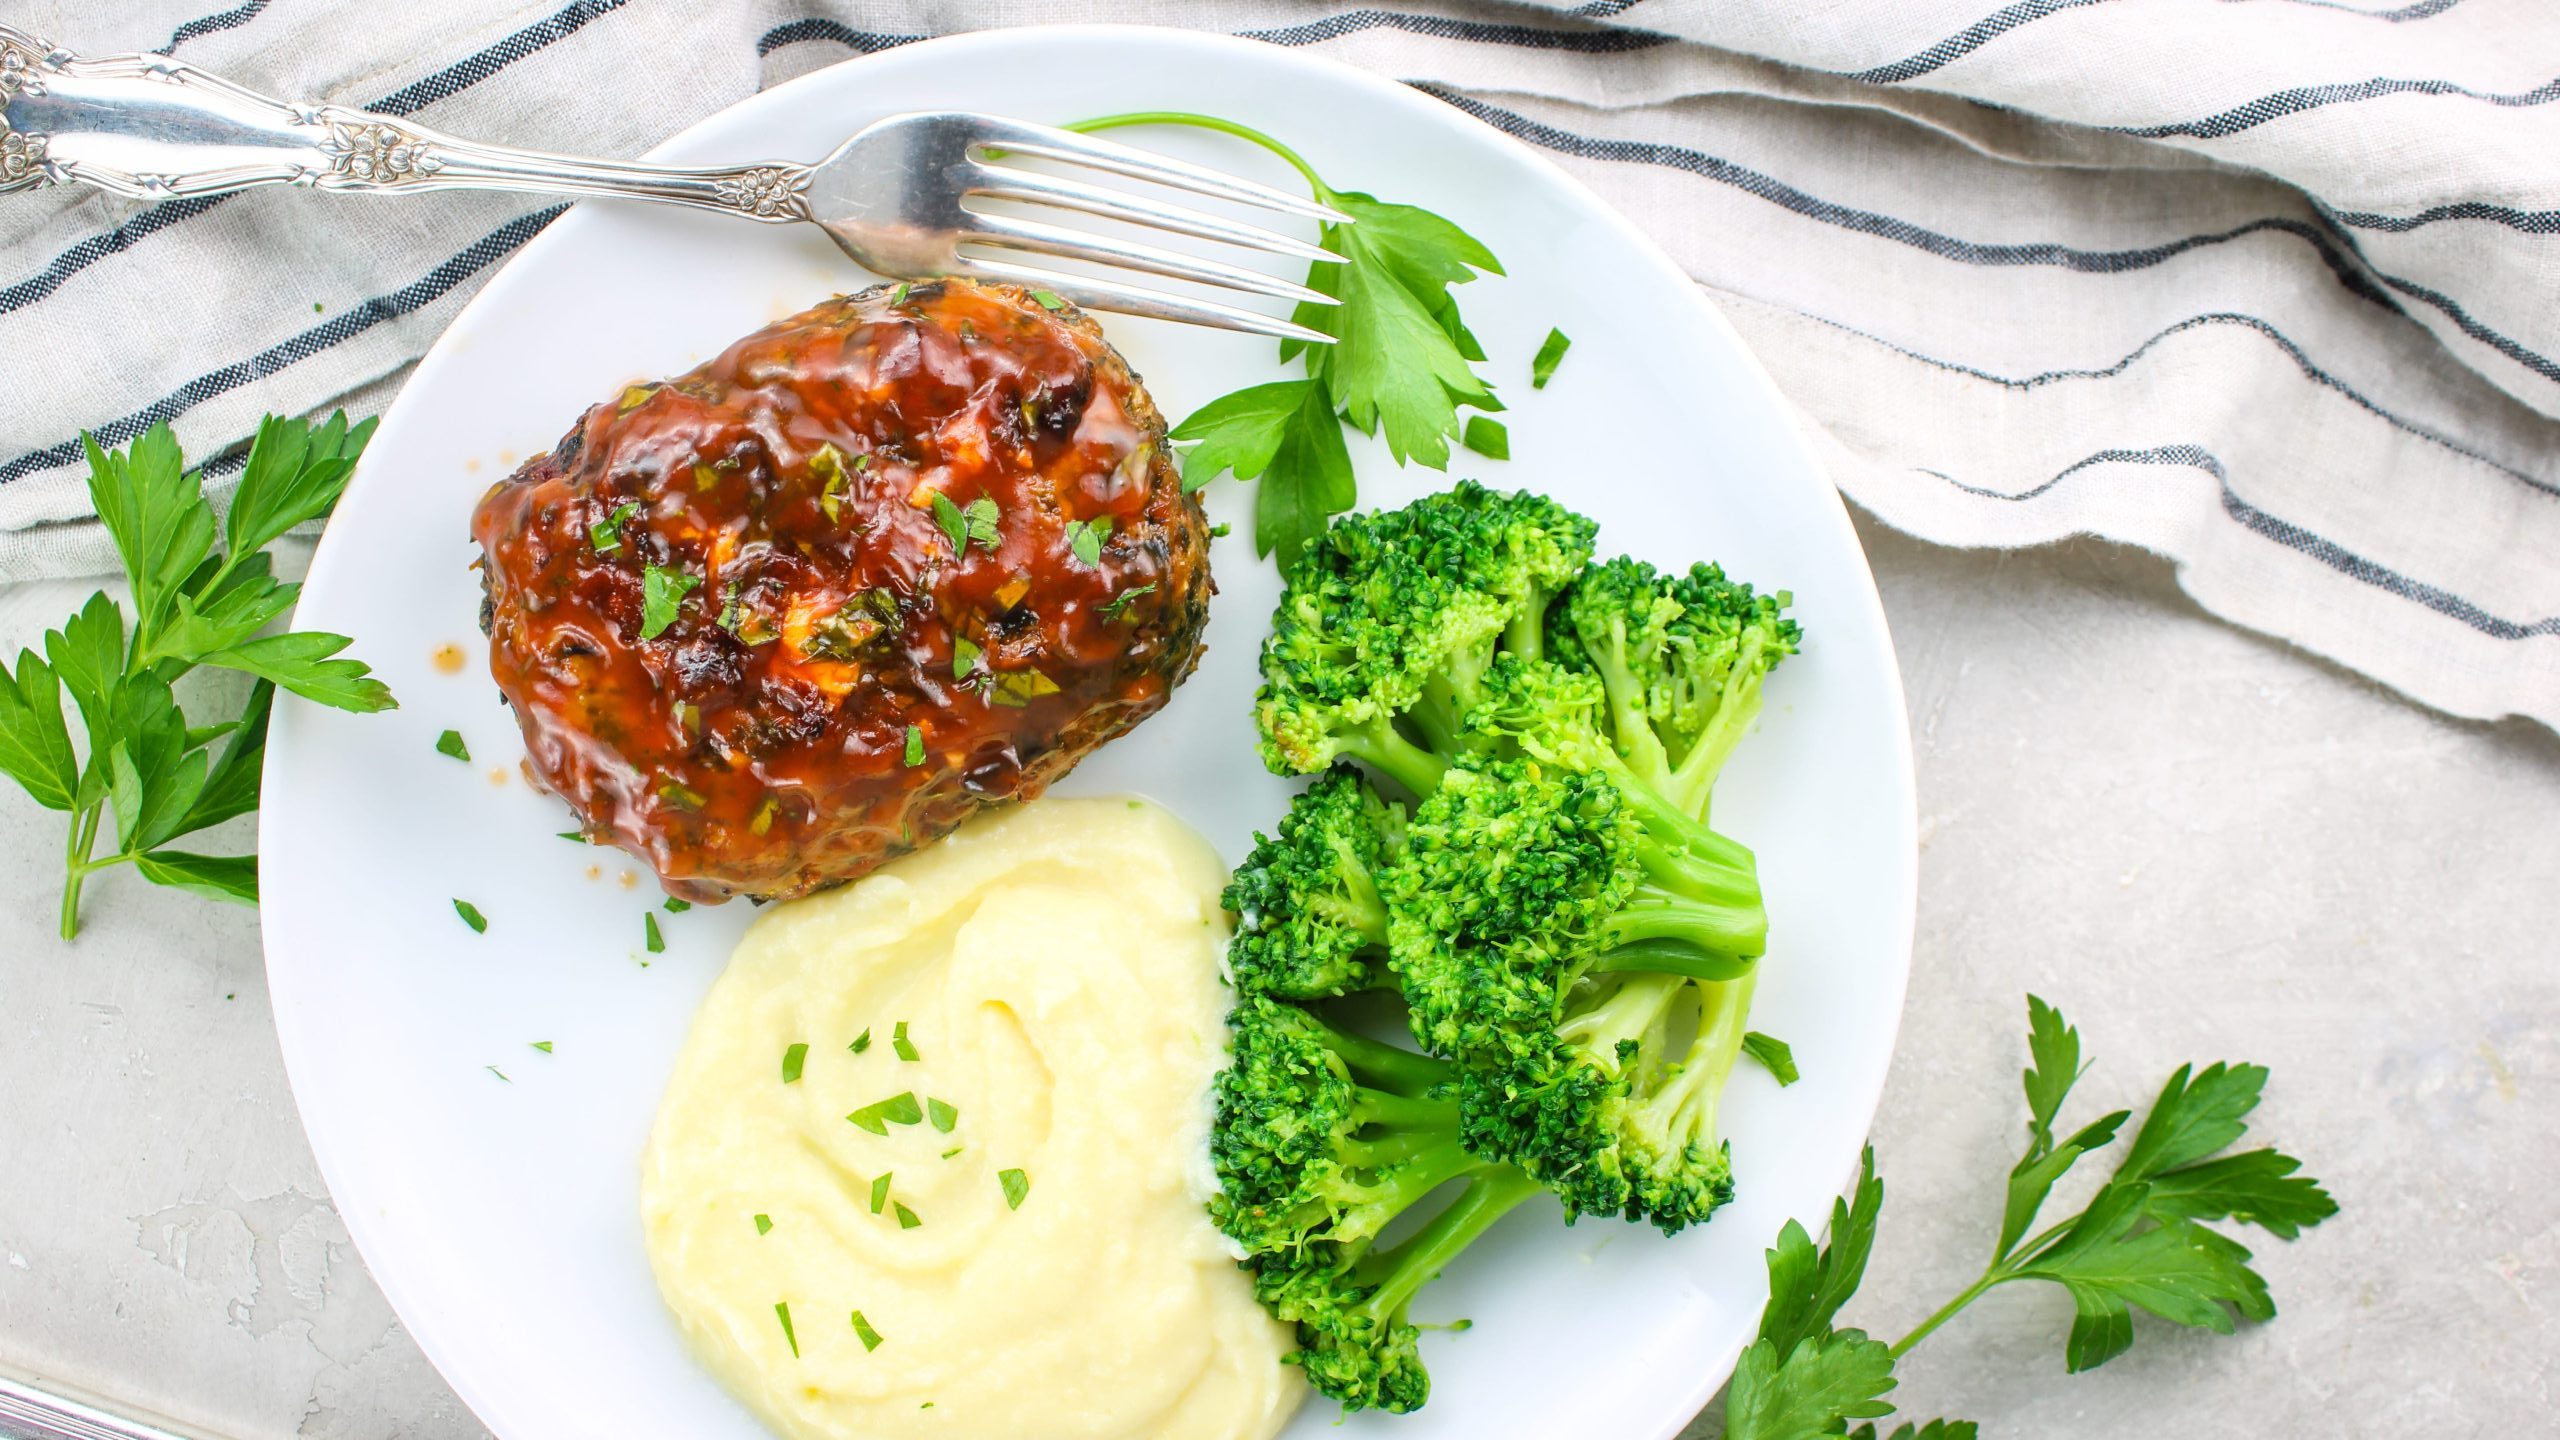 Spinach and Feta Mini Meatloaves are served with mashed potatoes and steamed broccoli